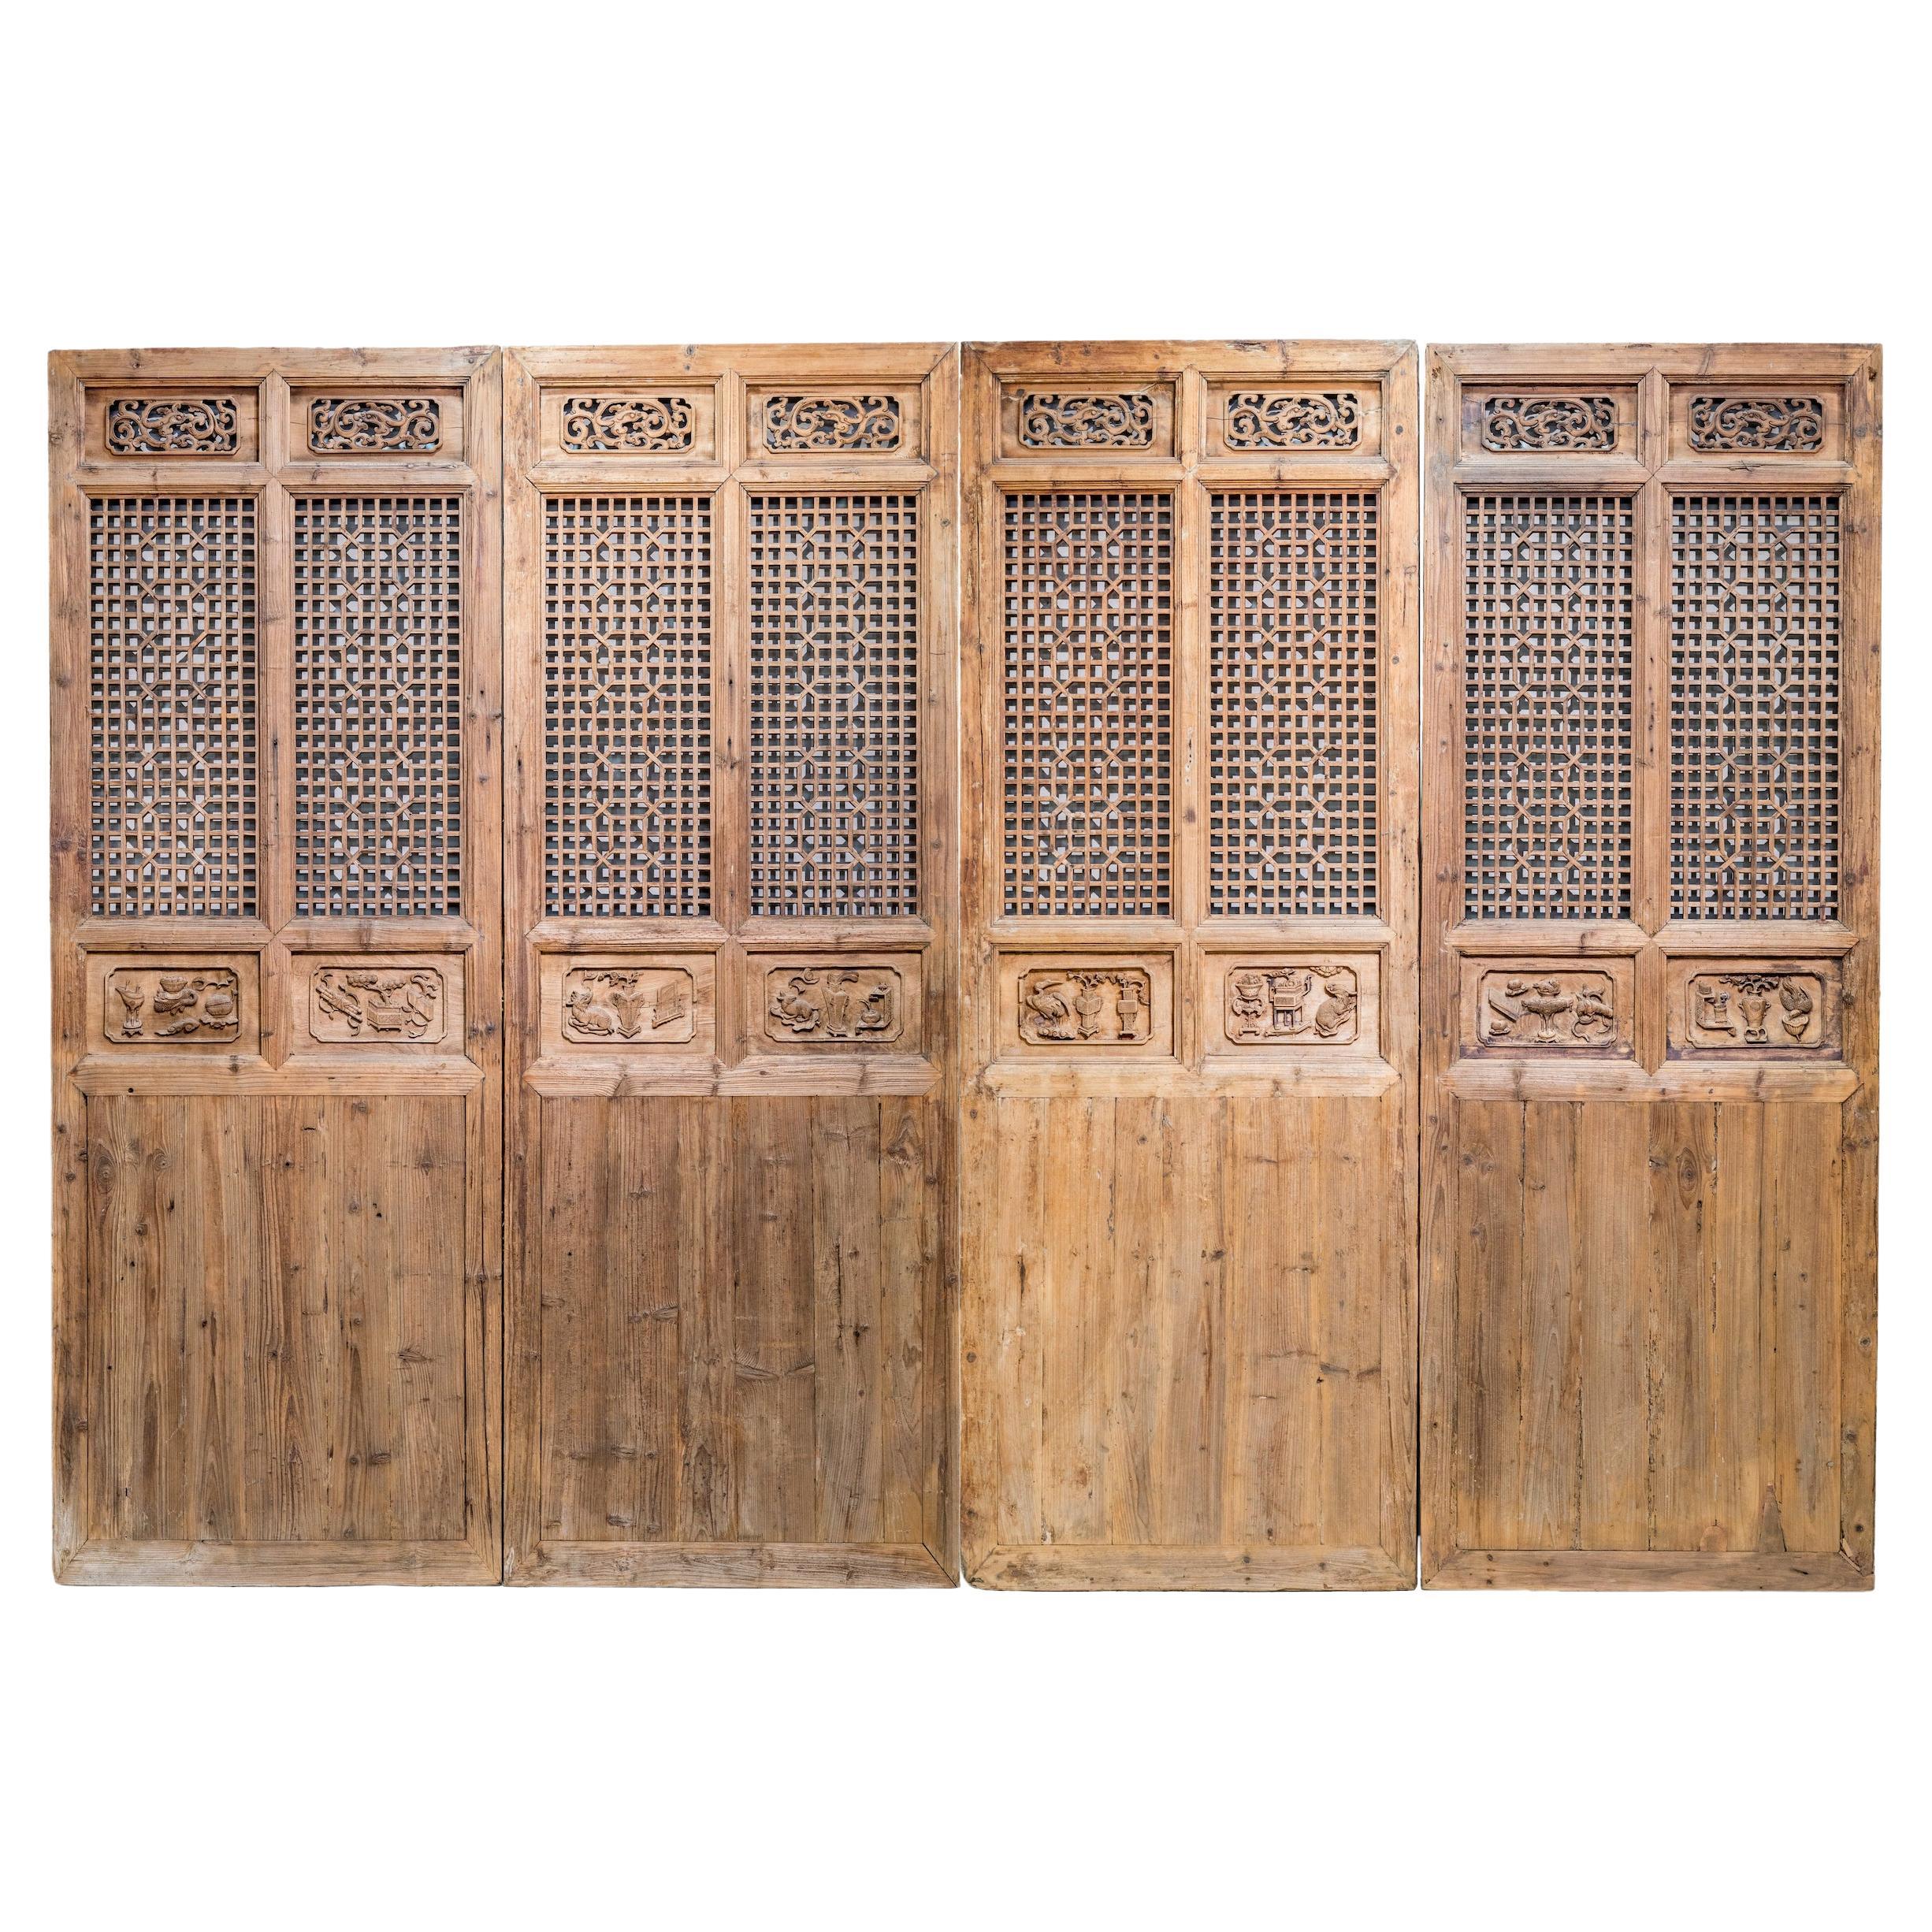 Late 19th Century Door Panels with Carving and Latticework